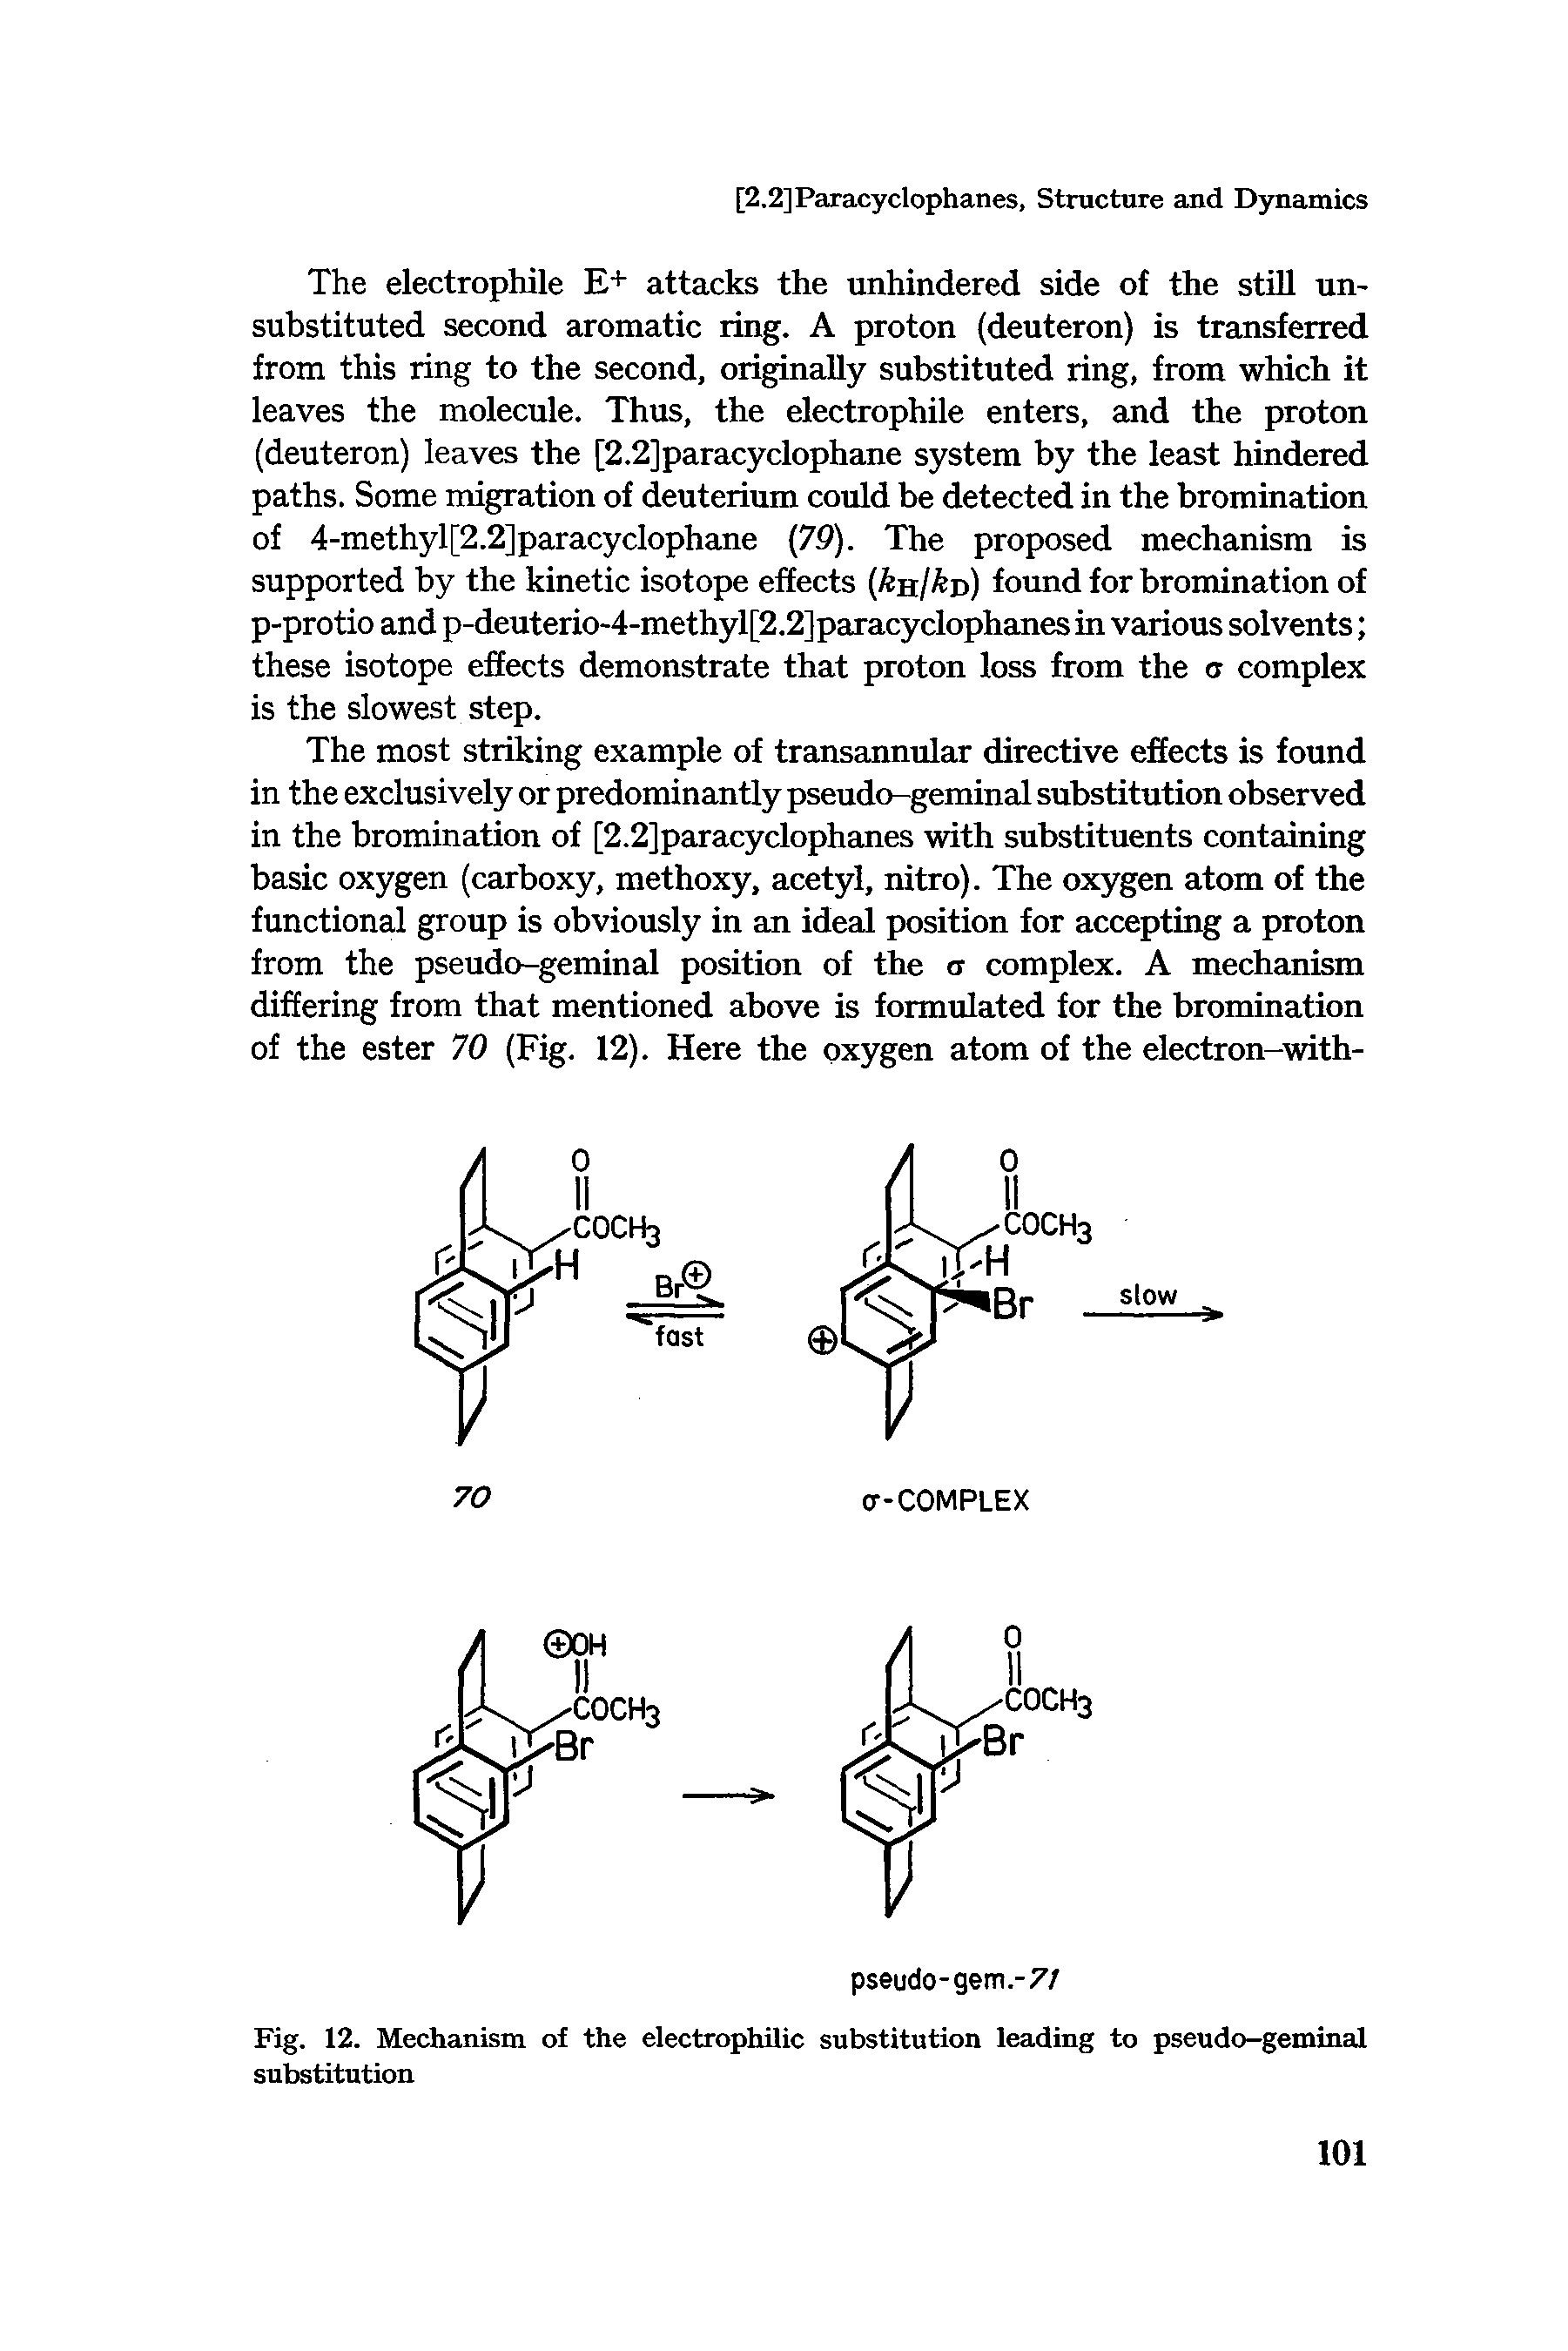 Fig. 12. Mechanism of the electrophilic substitution leading to pseudo-geminal substitution...